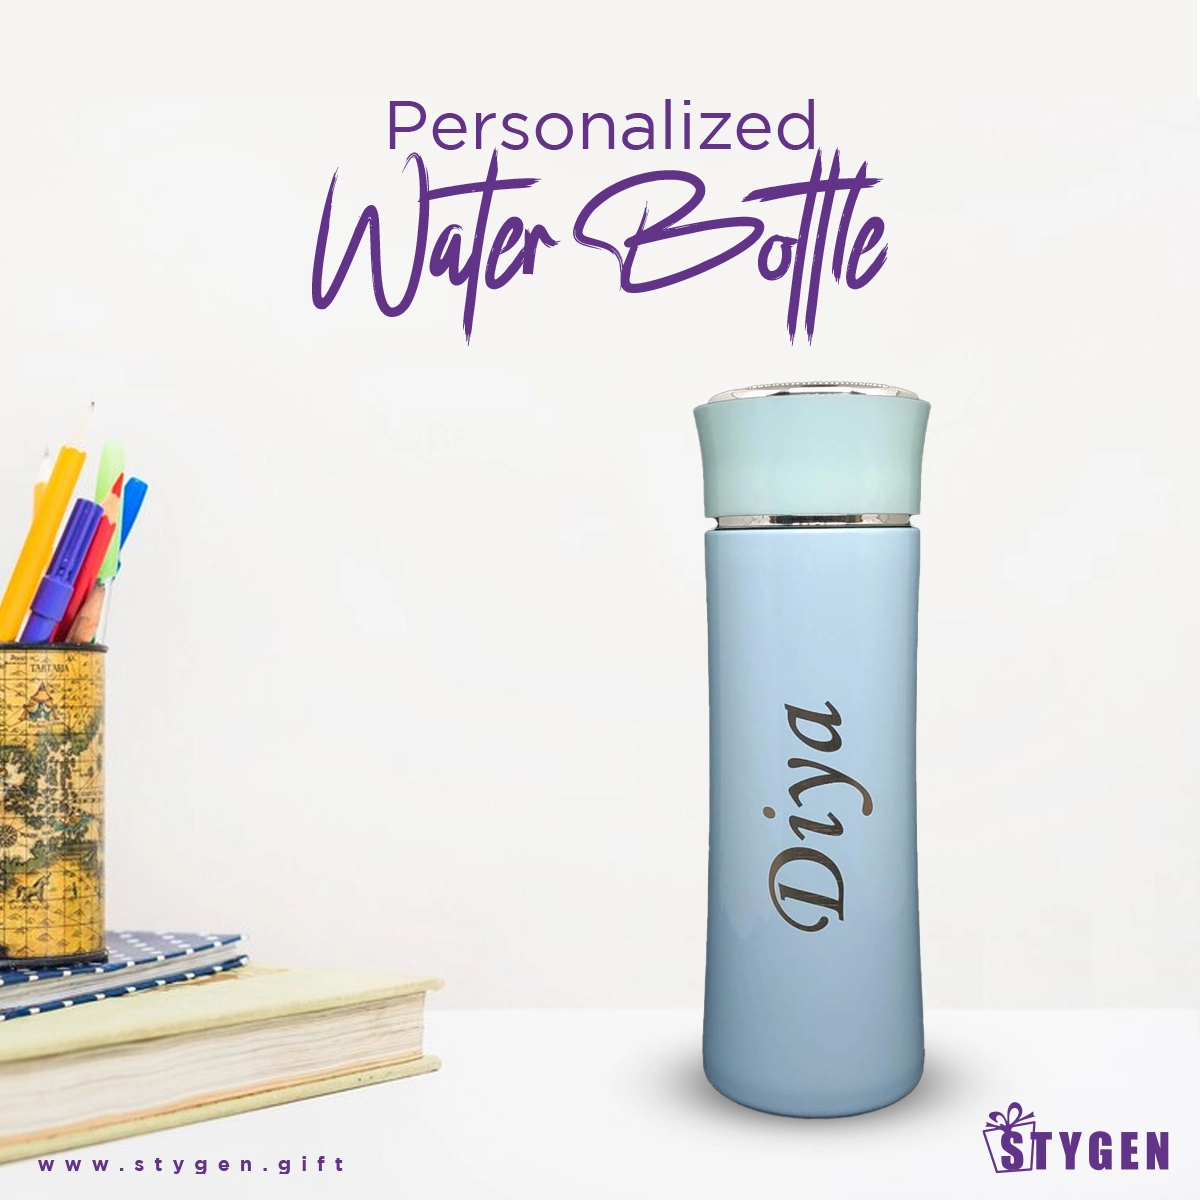 Personalized Thermos Water Bottle for your loved one (03)